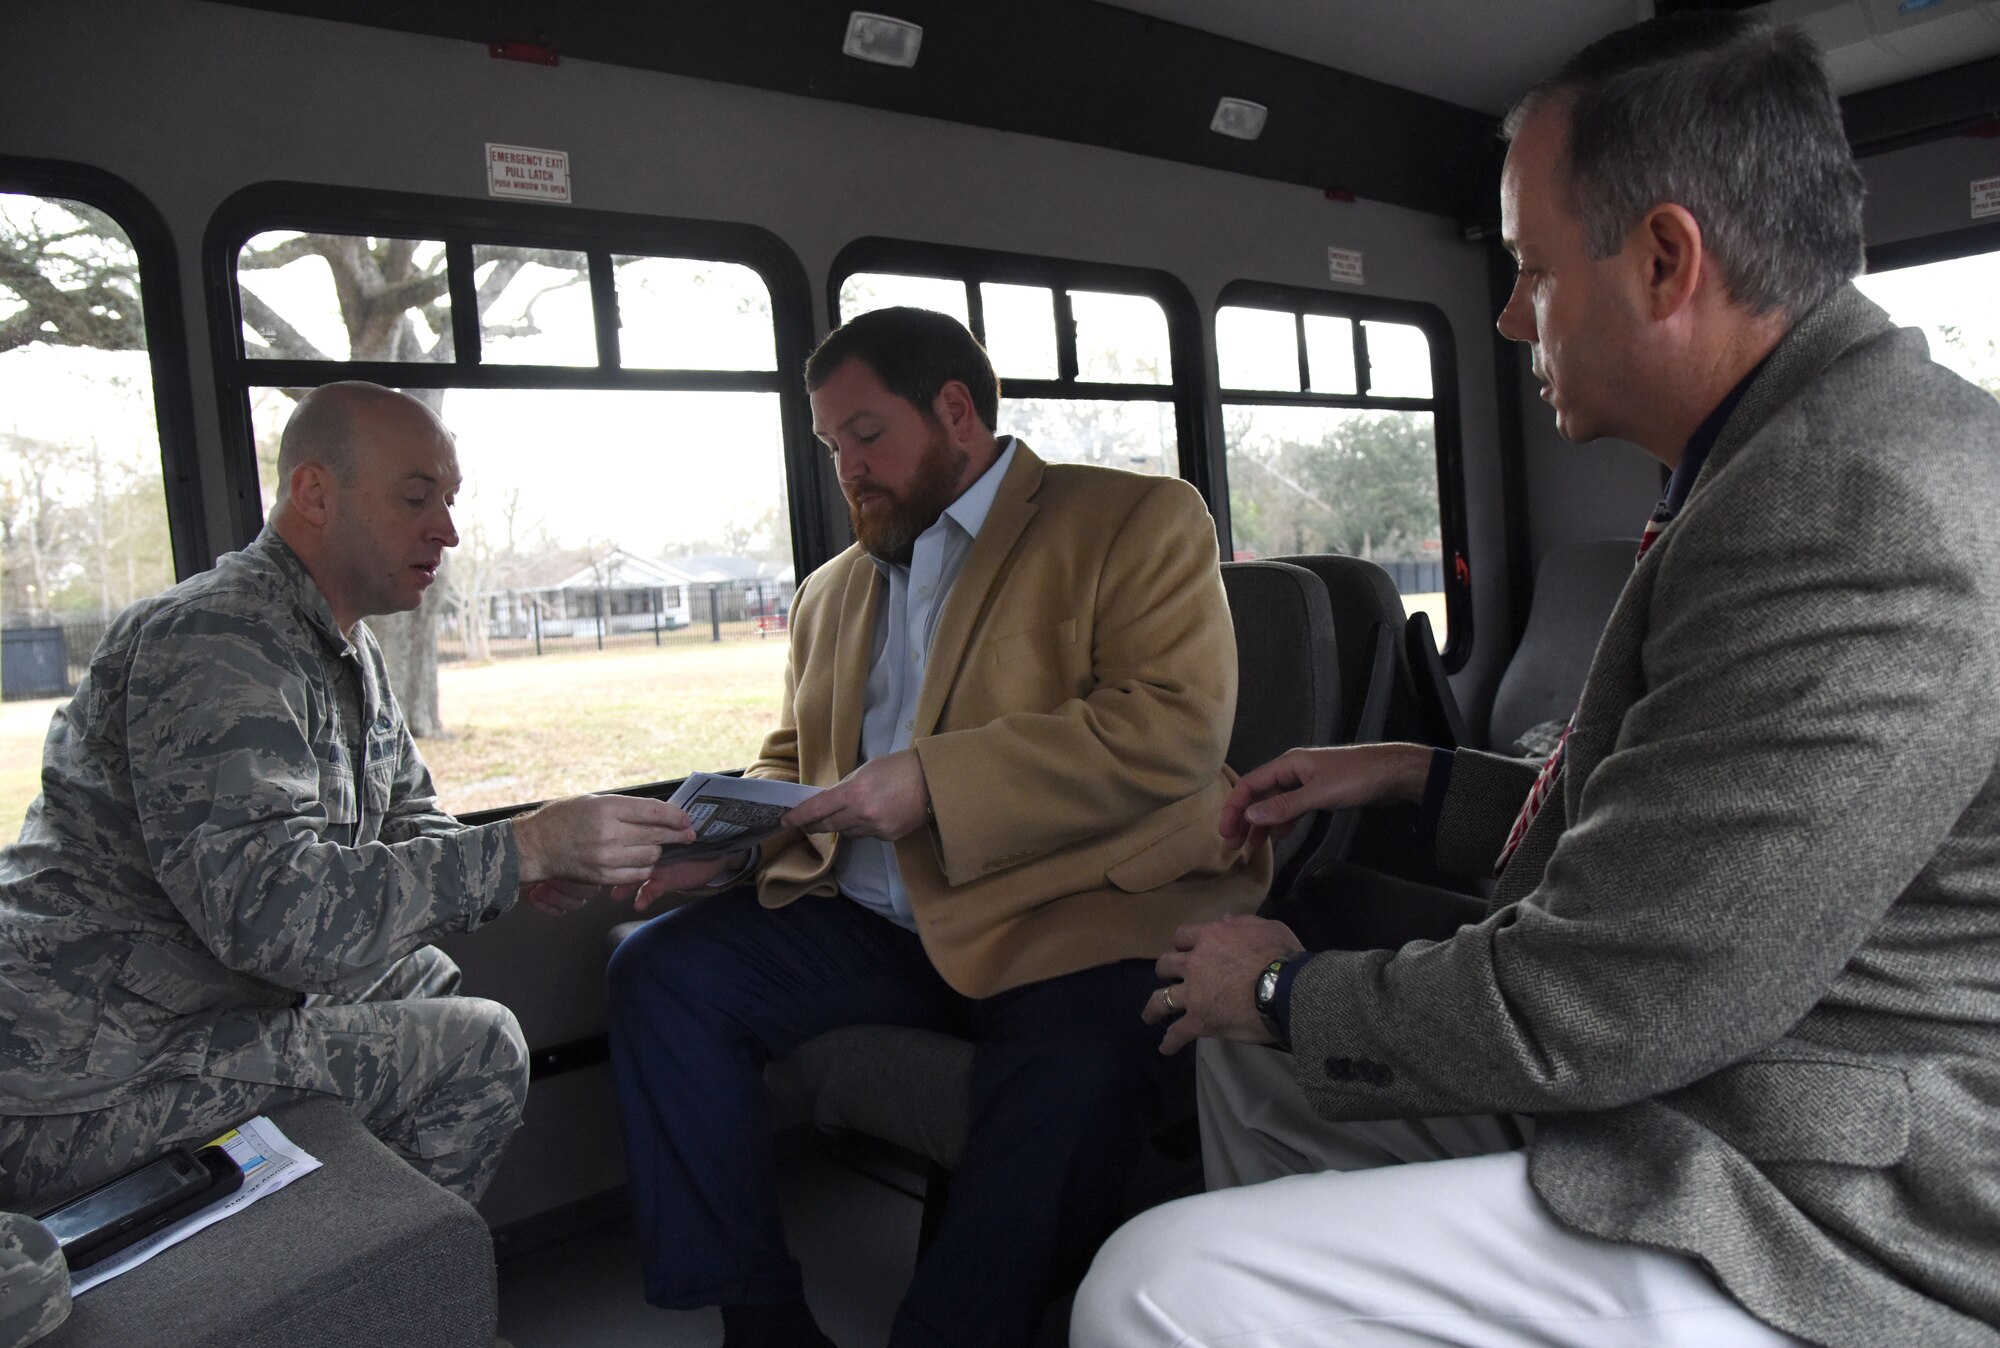 Col. Danny Davis, 81st Mission Support Group commander, briefs David Allen, legislative assistant for Congressman Steven Palazzo, on the site of the new Division Gate entrance as Mark Mills, 81st Infrastructure Division engineering flight chief, looks on during a site visit Jan. 26, 2018, on Keesler Air Force Base, Mississippi. Allen visited Keesler to learn more about the base and on-going construction projects that impact the local community, like the Division Street Gate which will begin construction this summer. (U.S. Air Force photo by Kemberly Groue)